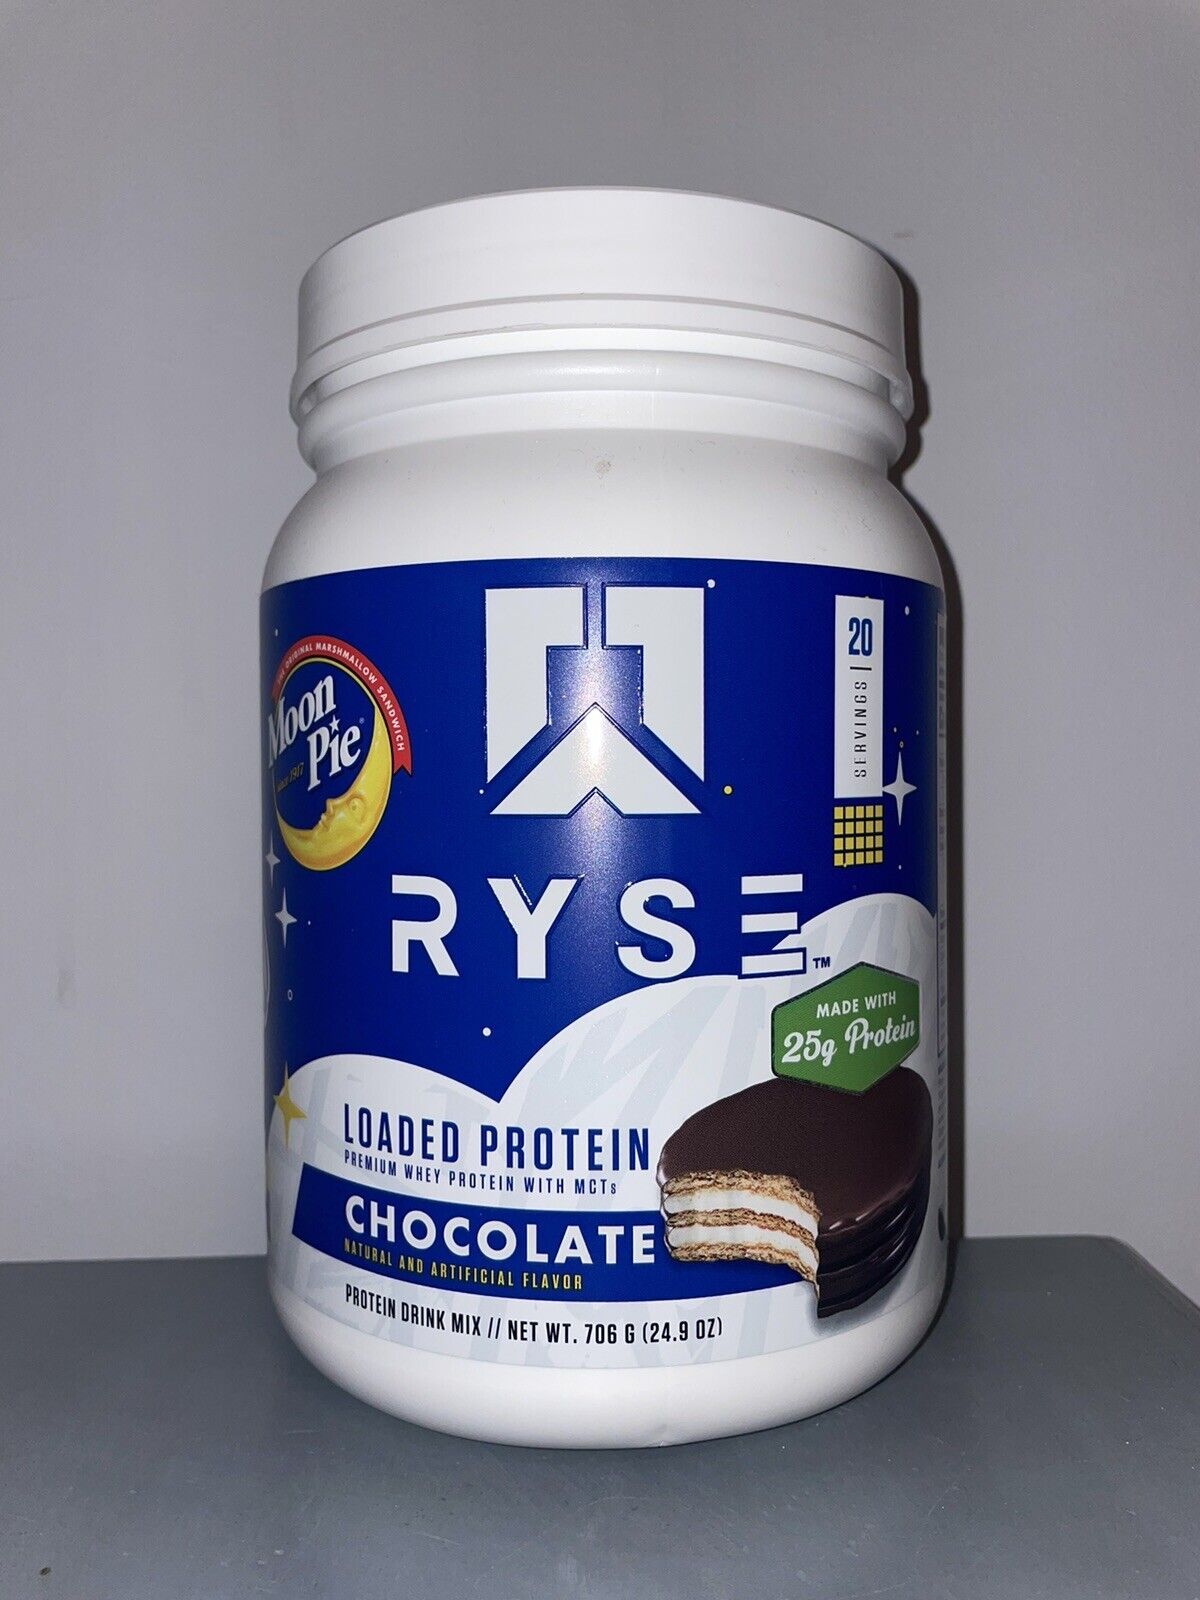 RYSE Moonpie Loaded Protein Powder 20 Servings 25g Whey Protein Isolate